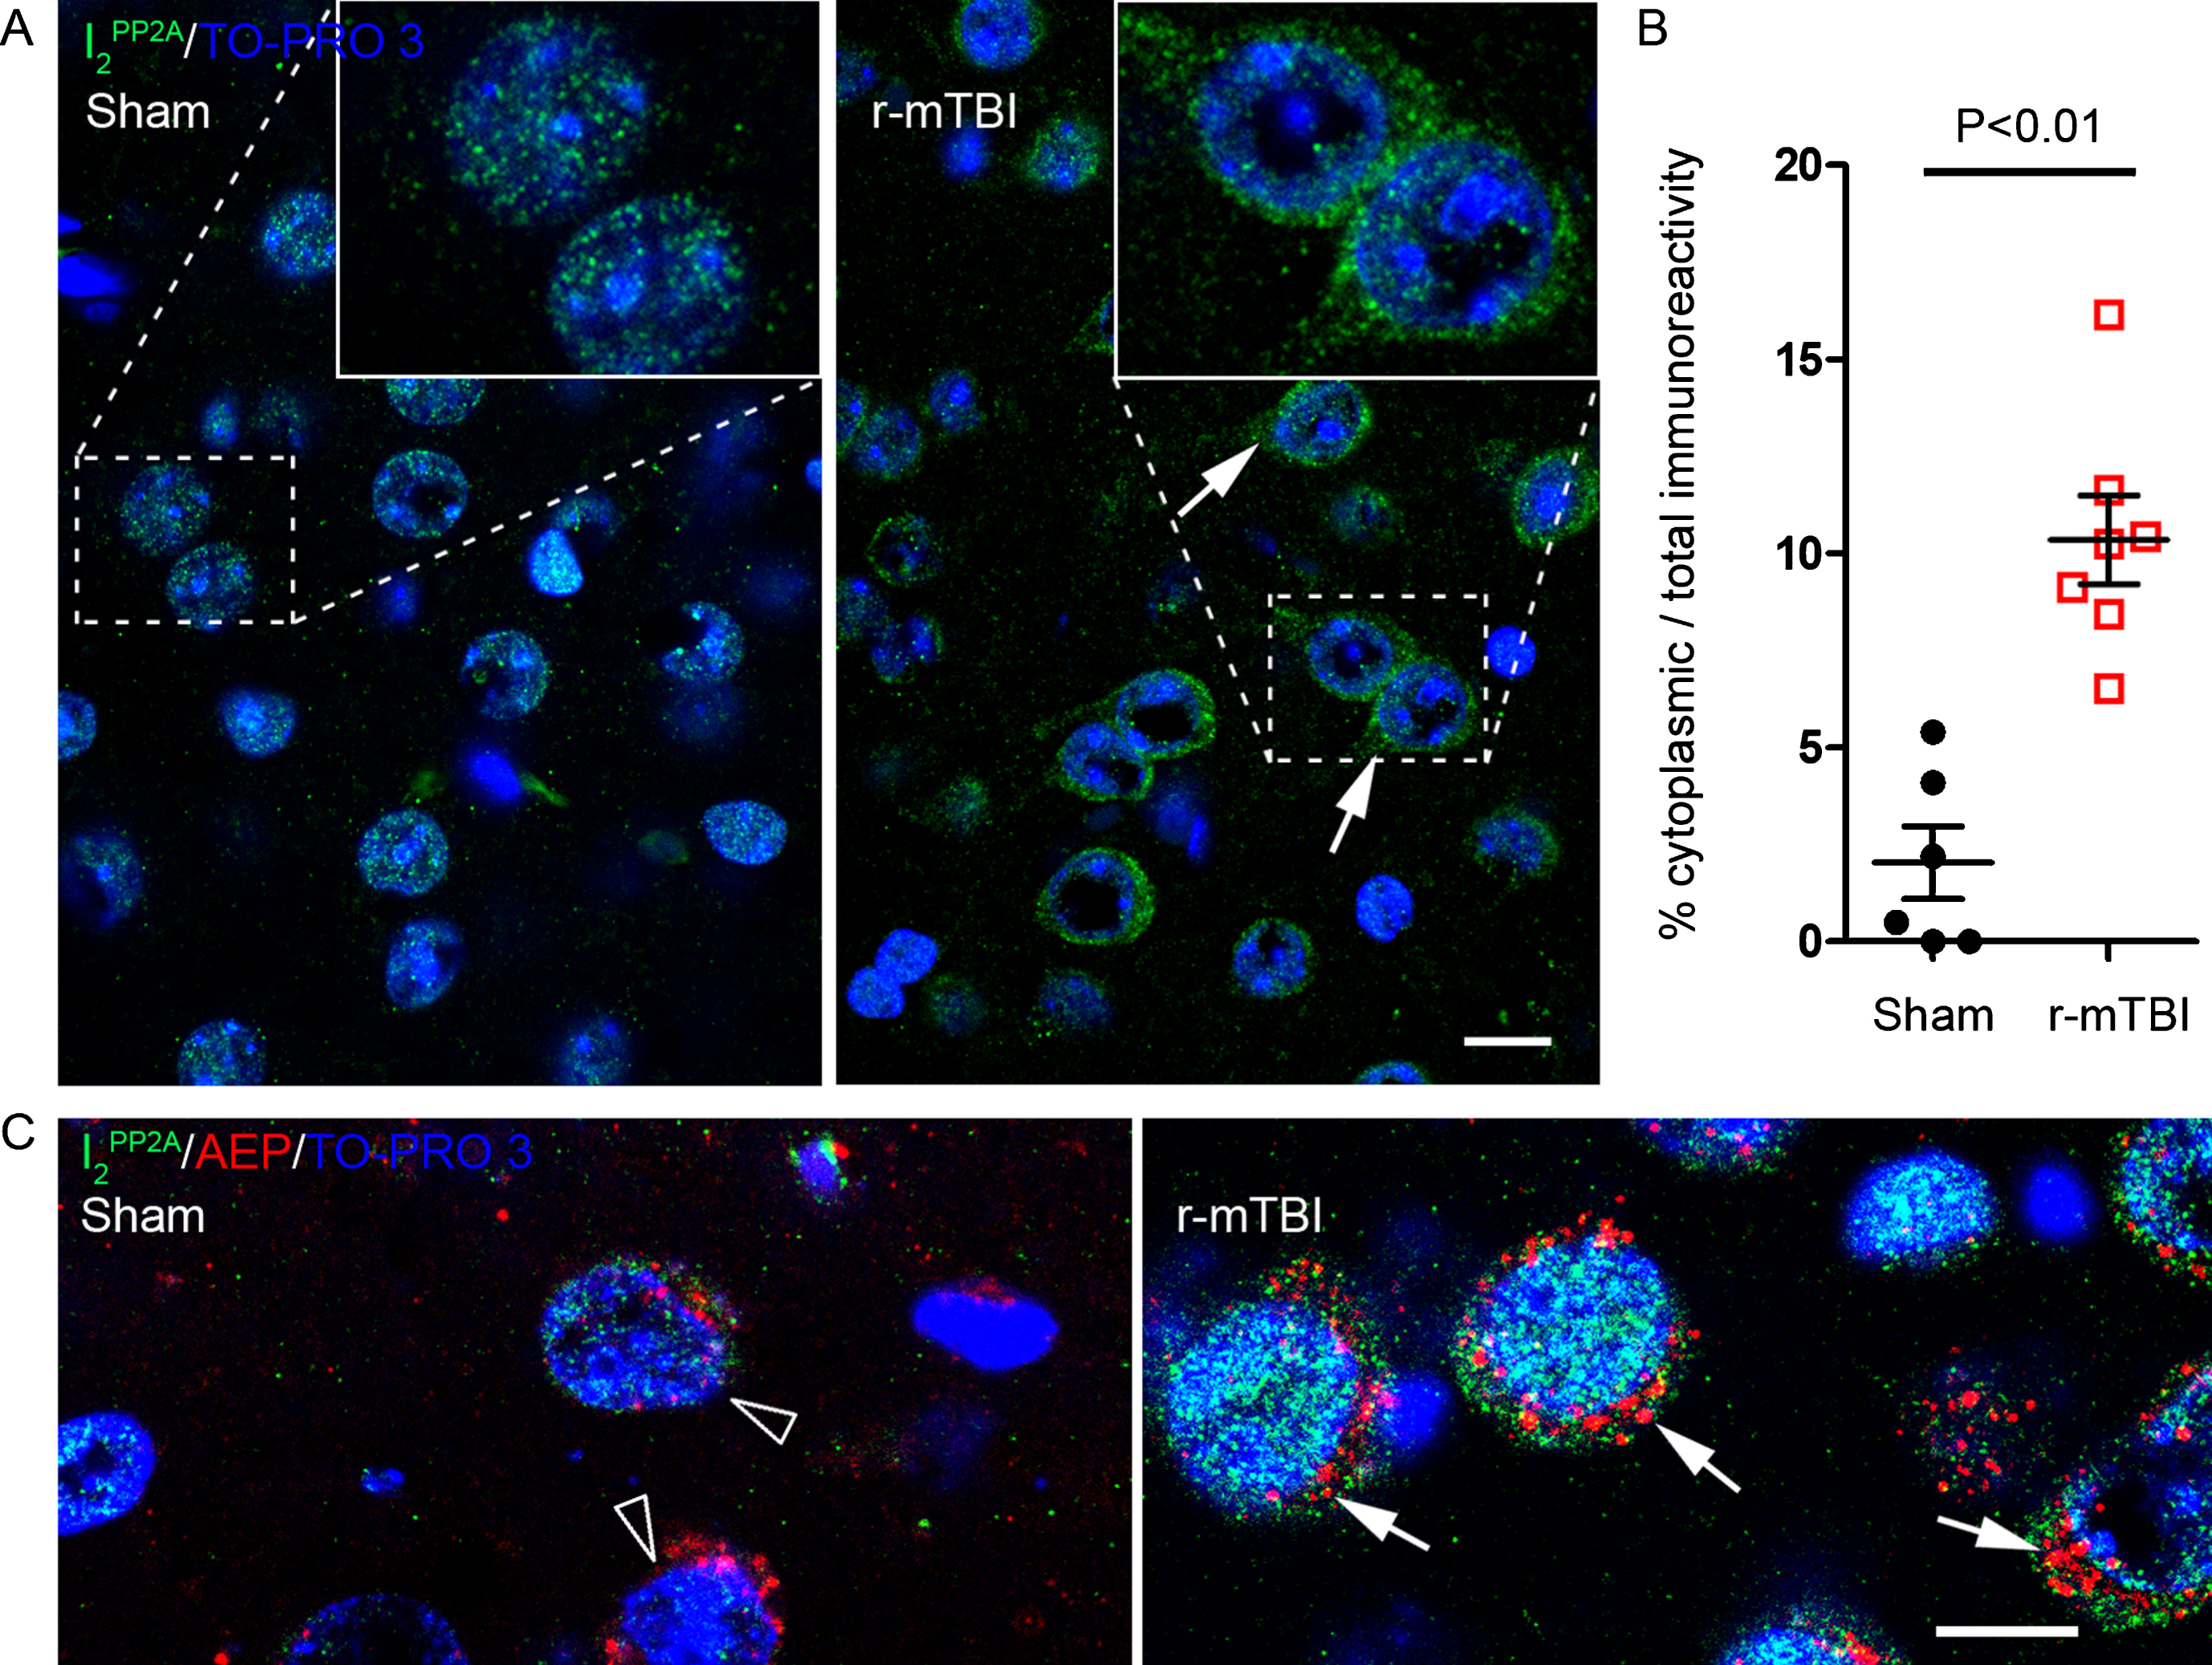 r-mTBI promotes translocation of I2PP2A/SET from neuronal nucleus to the cytoplasm in 3xTg-AD mice. A) Representative immunofluorescence staining showing translocation of inhibitor 2 of protein phosphatase 2A (I2PP2A or SET) to neuronal cytoplasm in cerebral cortex. B) Quantification of I2PP2A translocation, as percentage of cytoplasmic over total I2PP2A immunoreactivity within the same visual field. Data are expressed as scattered dot plots with mean±SEM (n = 6-7 mice/group) and analyzed with unpaired Student t test. C) Double immunofluorescent staining of I2PP2A and AEP in brain sections. Lysosome-like AEP-positive puncta and I2PP2A coexisted in the cytoplasm of neurons (arrows) in brains with r-mTBI; neurons in sham control brains showed fewer AEP puncta (hollow arrowhead). Scale bar = 10μm for all images.